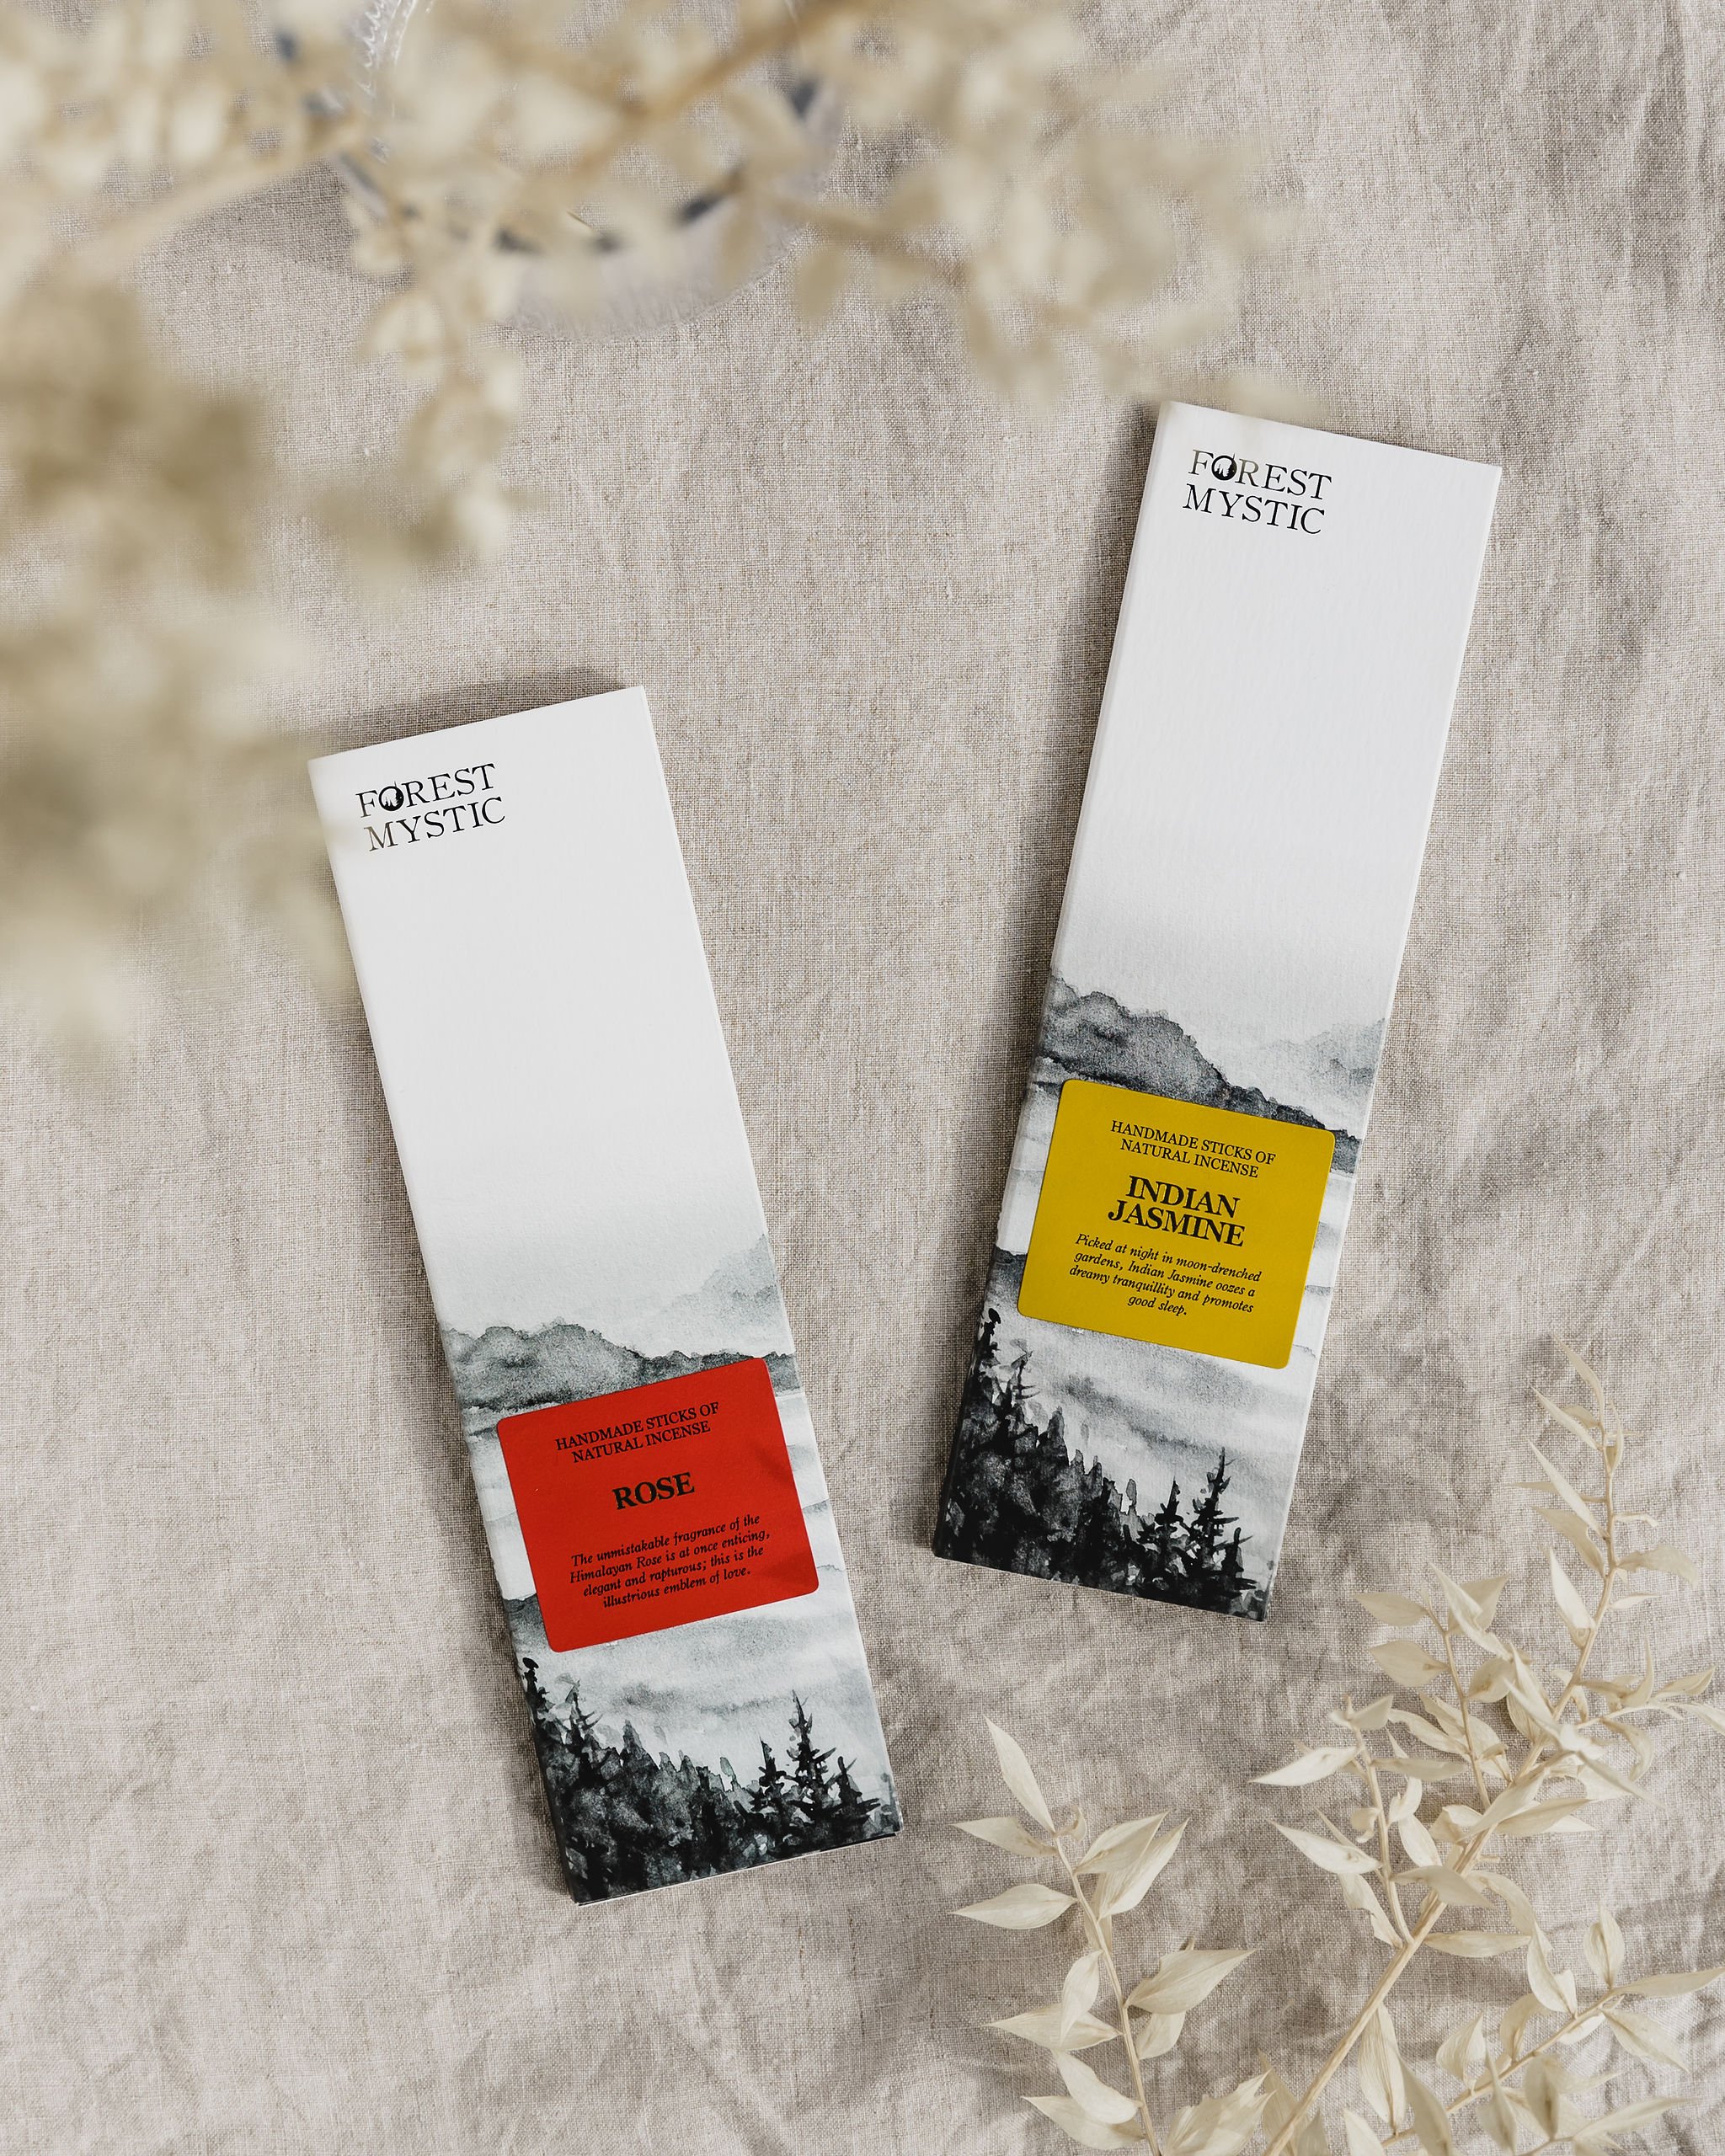 two packs of Forest Mystic incense